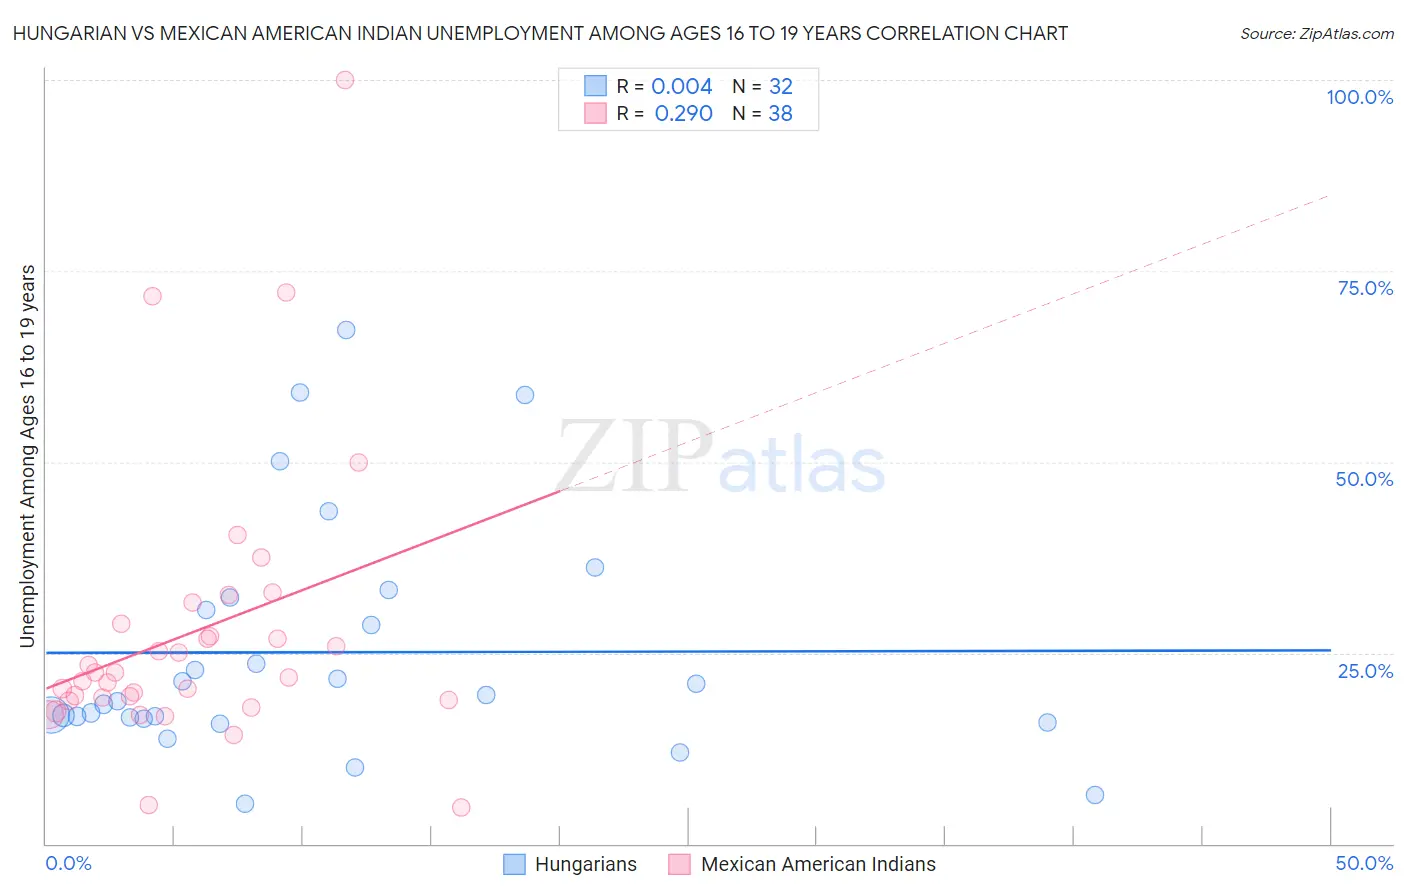 Hungarian vs Mexican American Indian Unemployment Among Ages 16 to 19 years